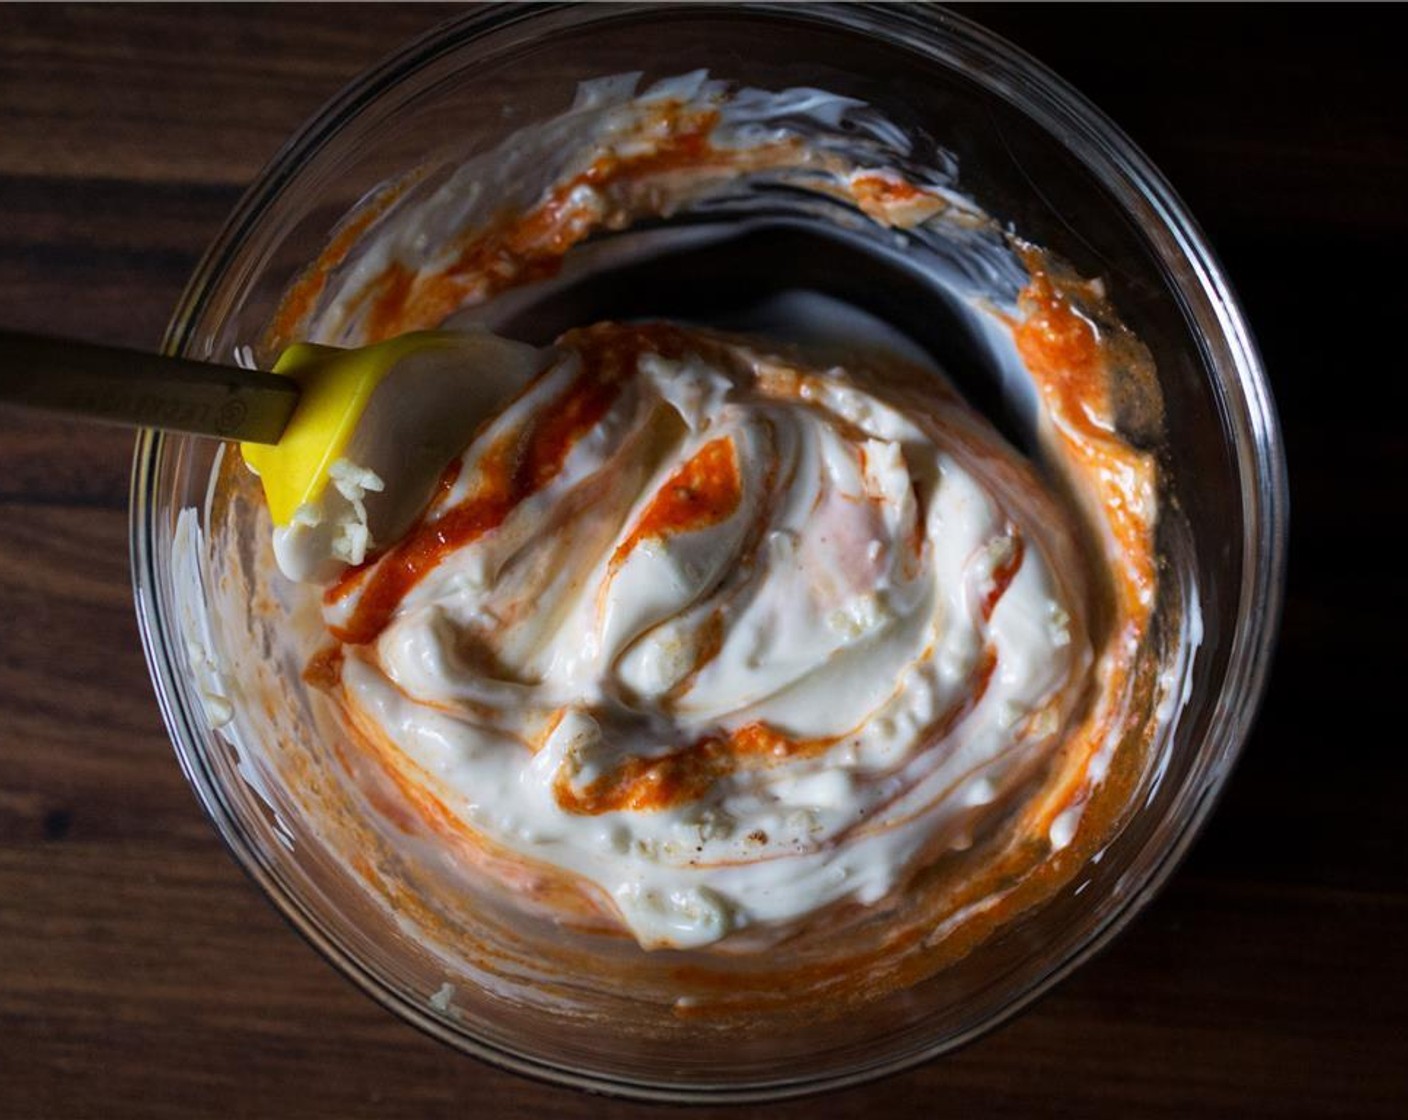 step 3 To make the Sriracha Aioli; in a small bowl add the Mayonnaise (1/2 cup), 1/3 of the minced garlic, 1/4 teaspoon Kosher Salt (to taste), Cayenne Pepper (1 pinch), and Sriracha (1 tsp). Stir well to combine.